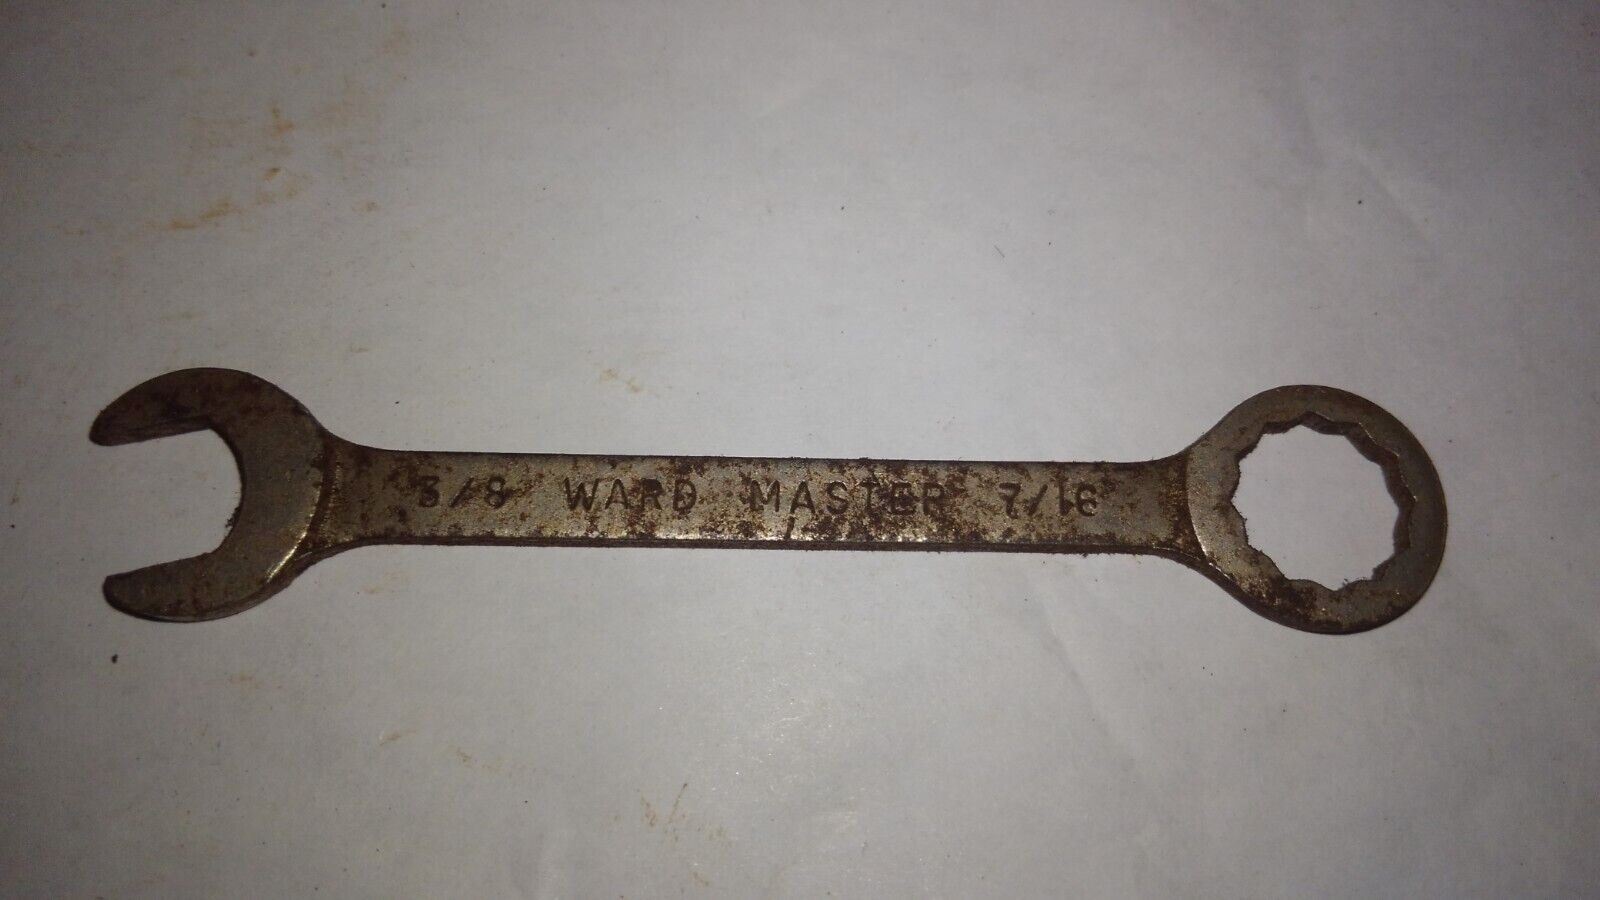 Vintage Wards Master Open End Wrench 3/8 7/16 Combination